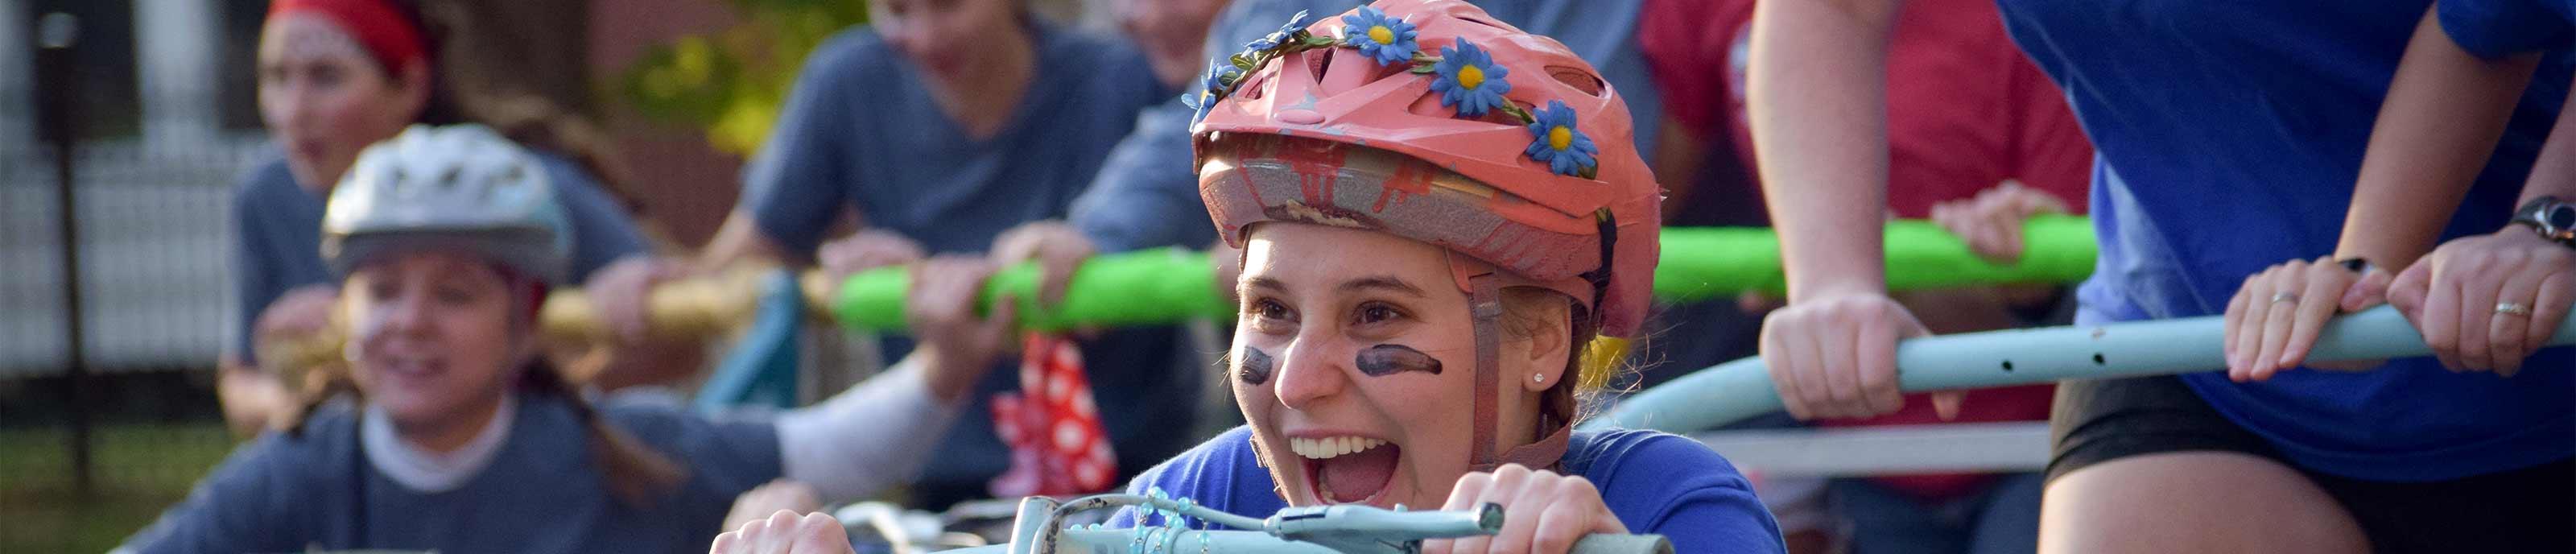 Student having fun riding in a bed at bed races